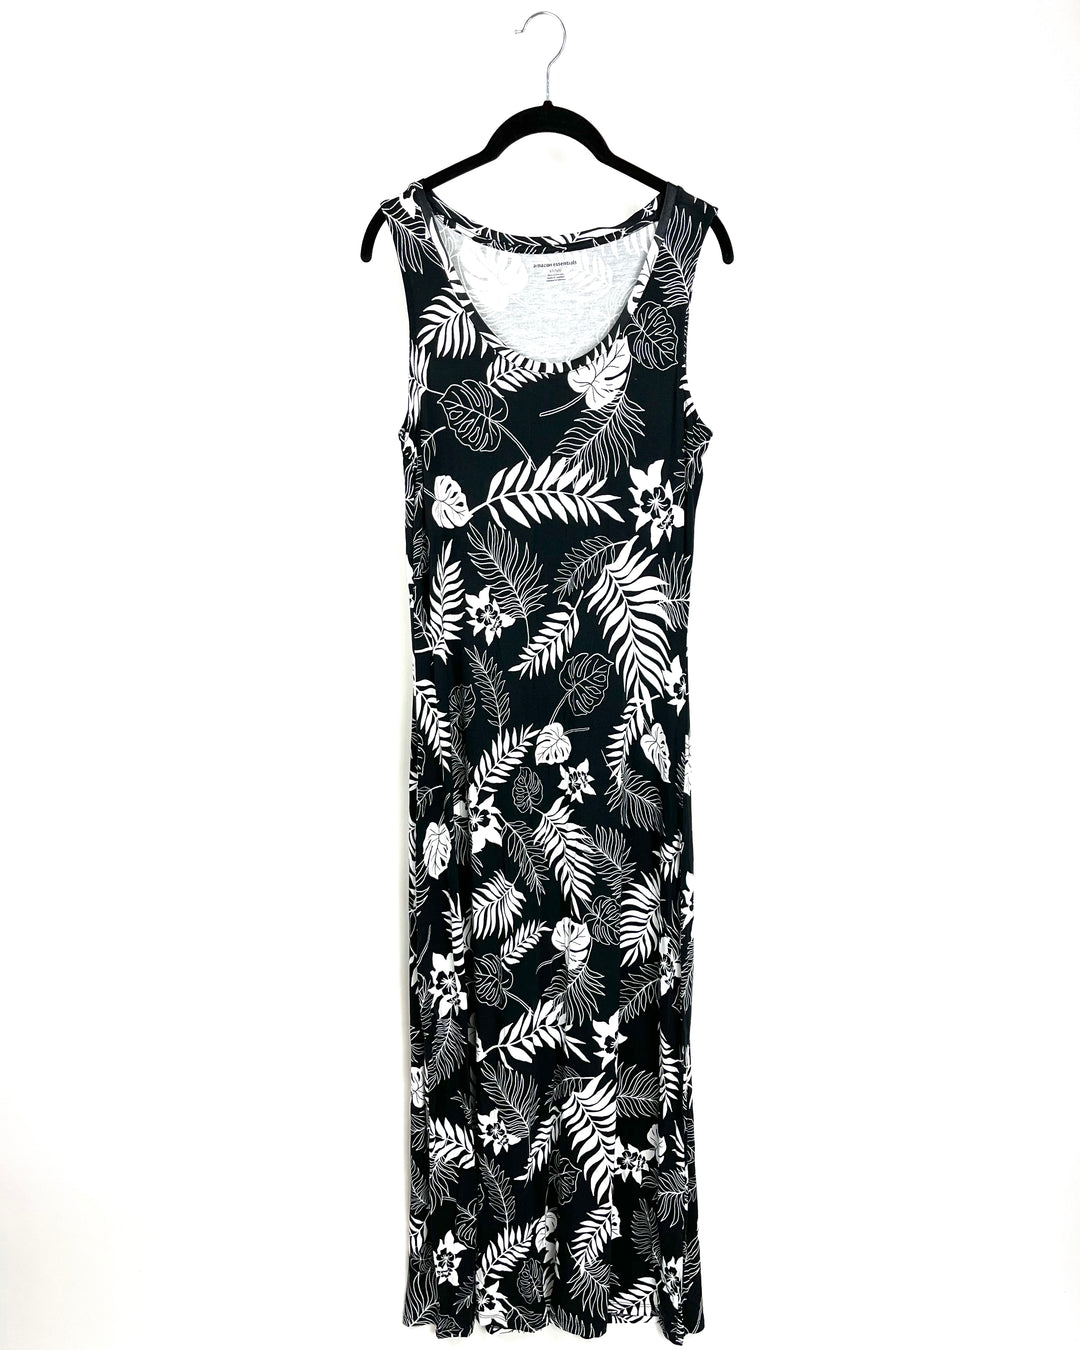 Sleeveless Black And White Tropical Dress - Small